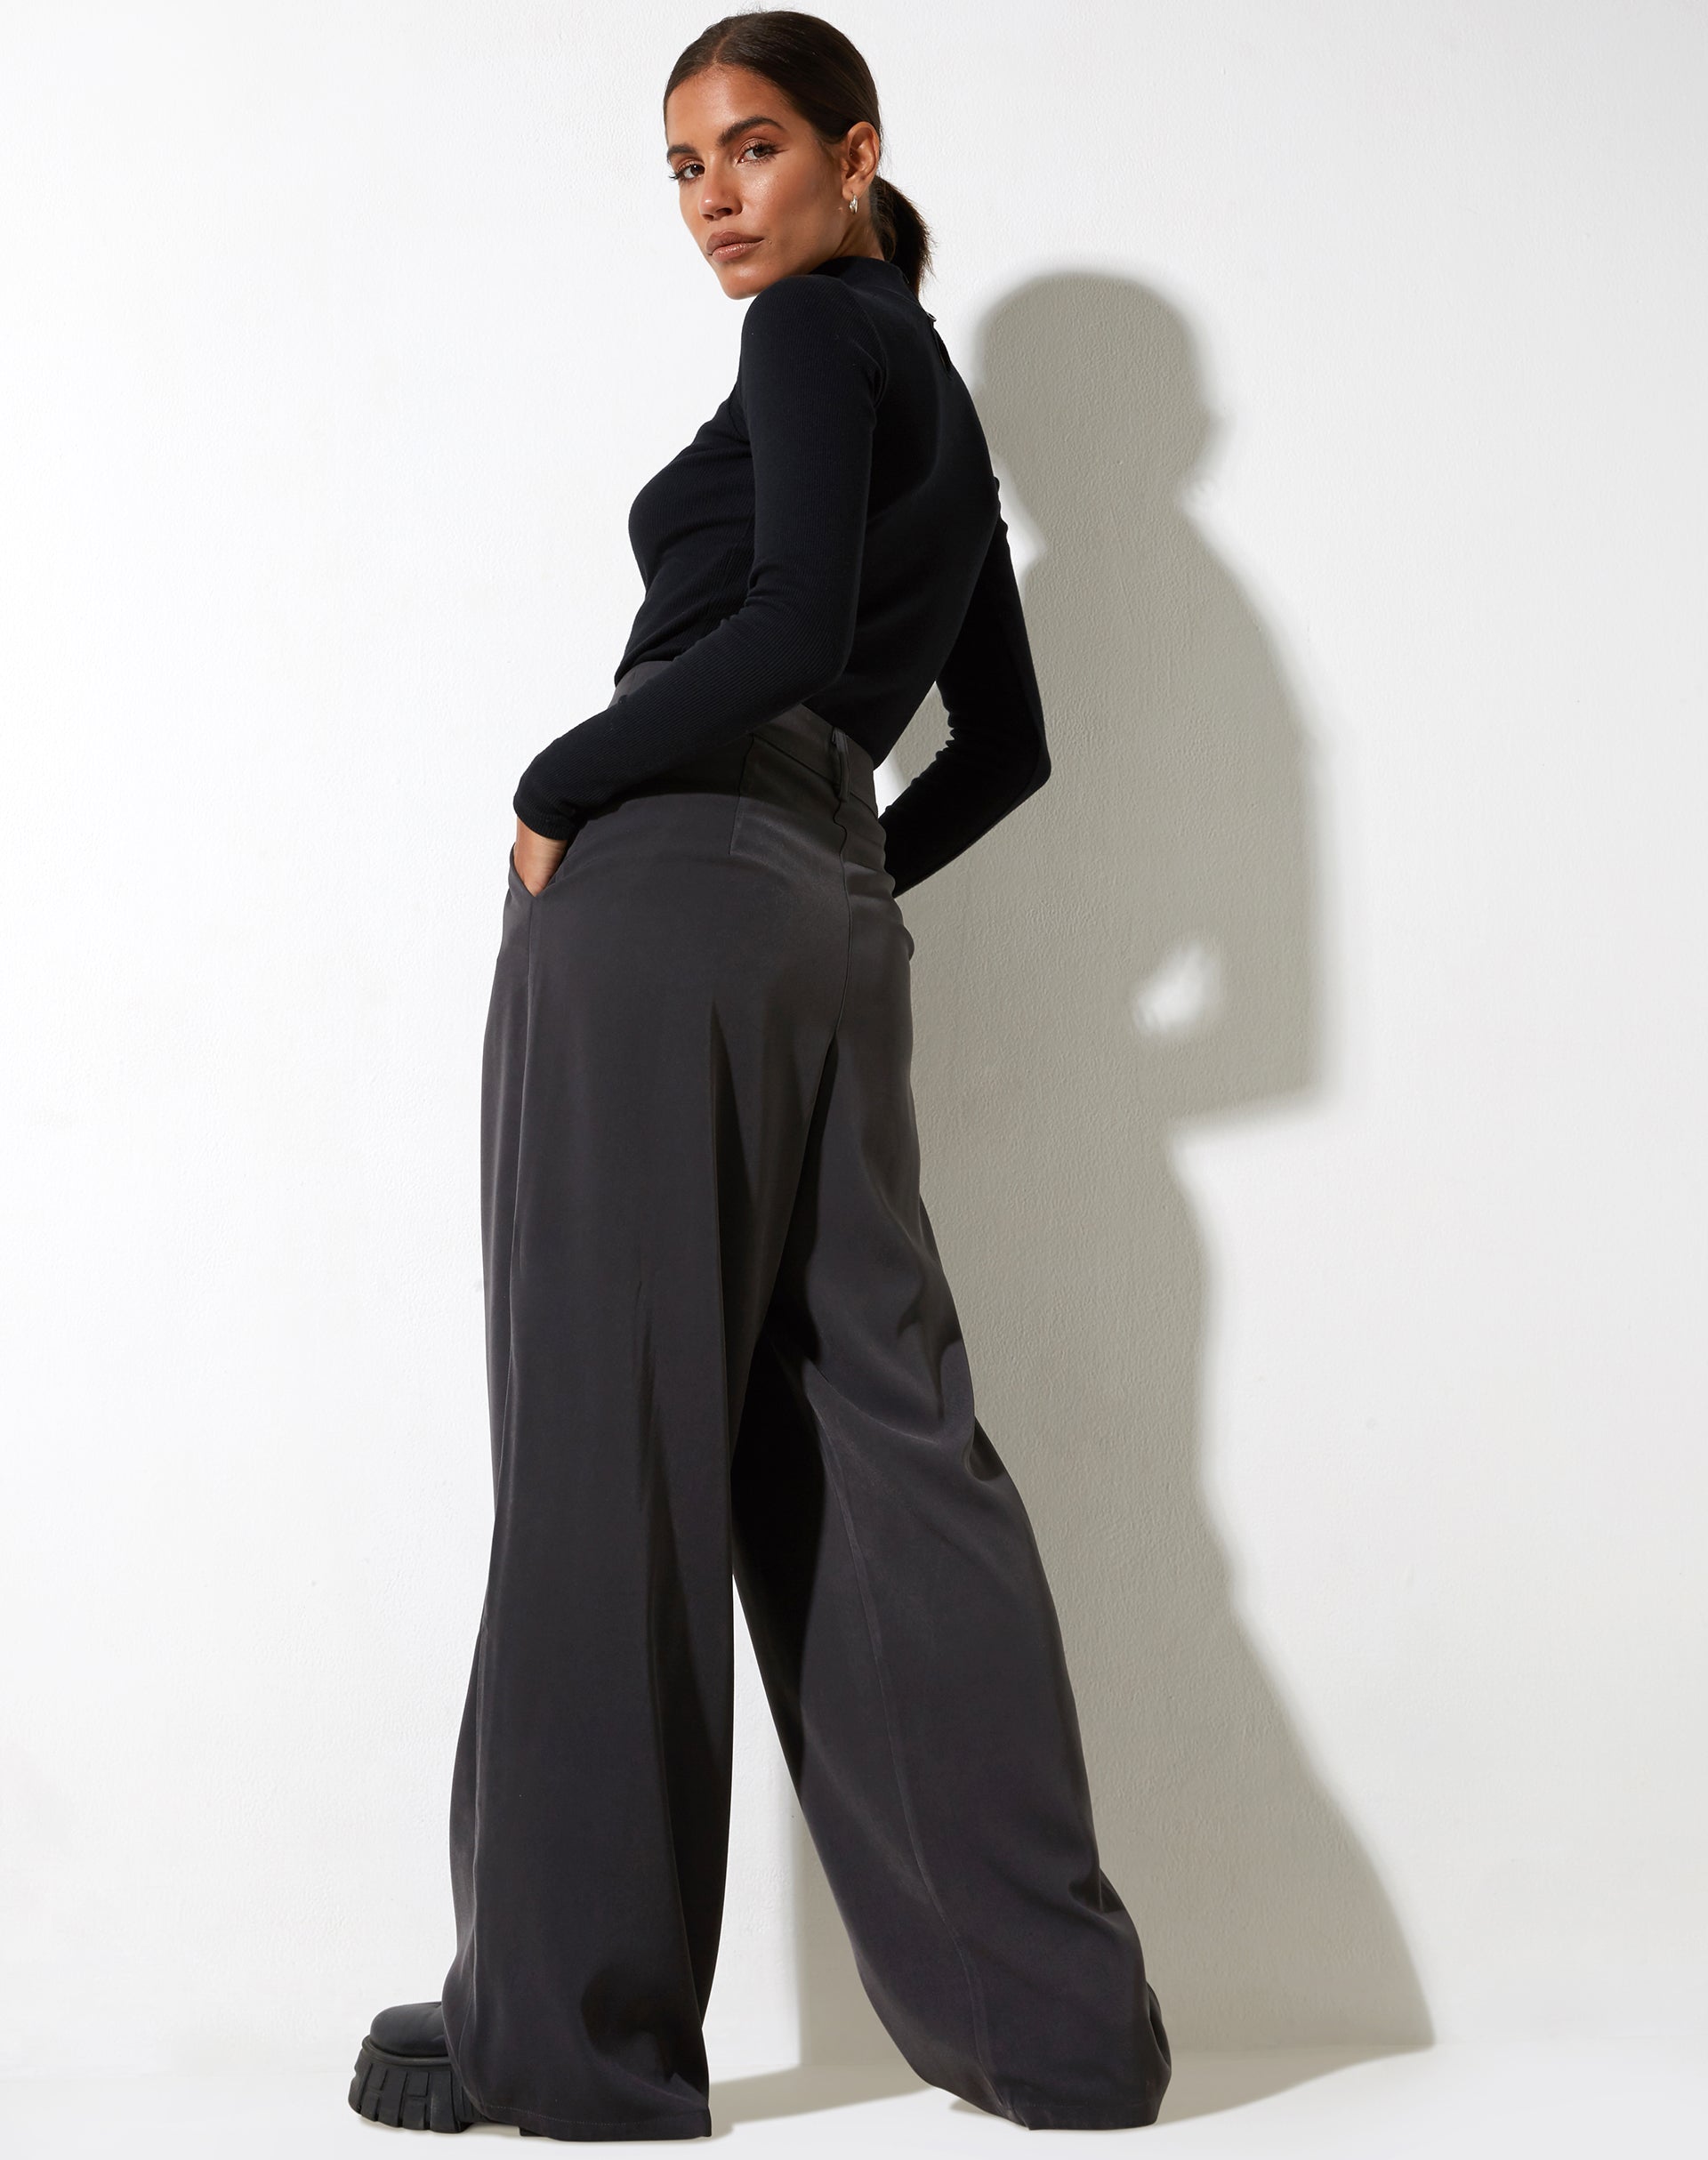 image of Yeka Trouser in Tailoring Charcoal